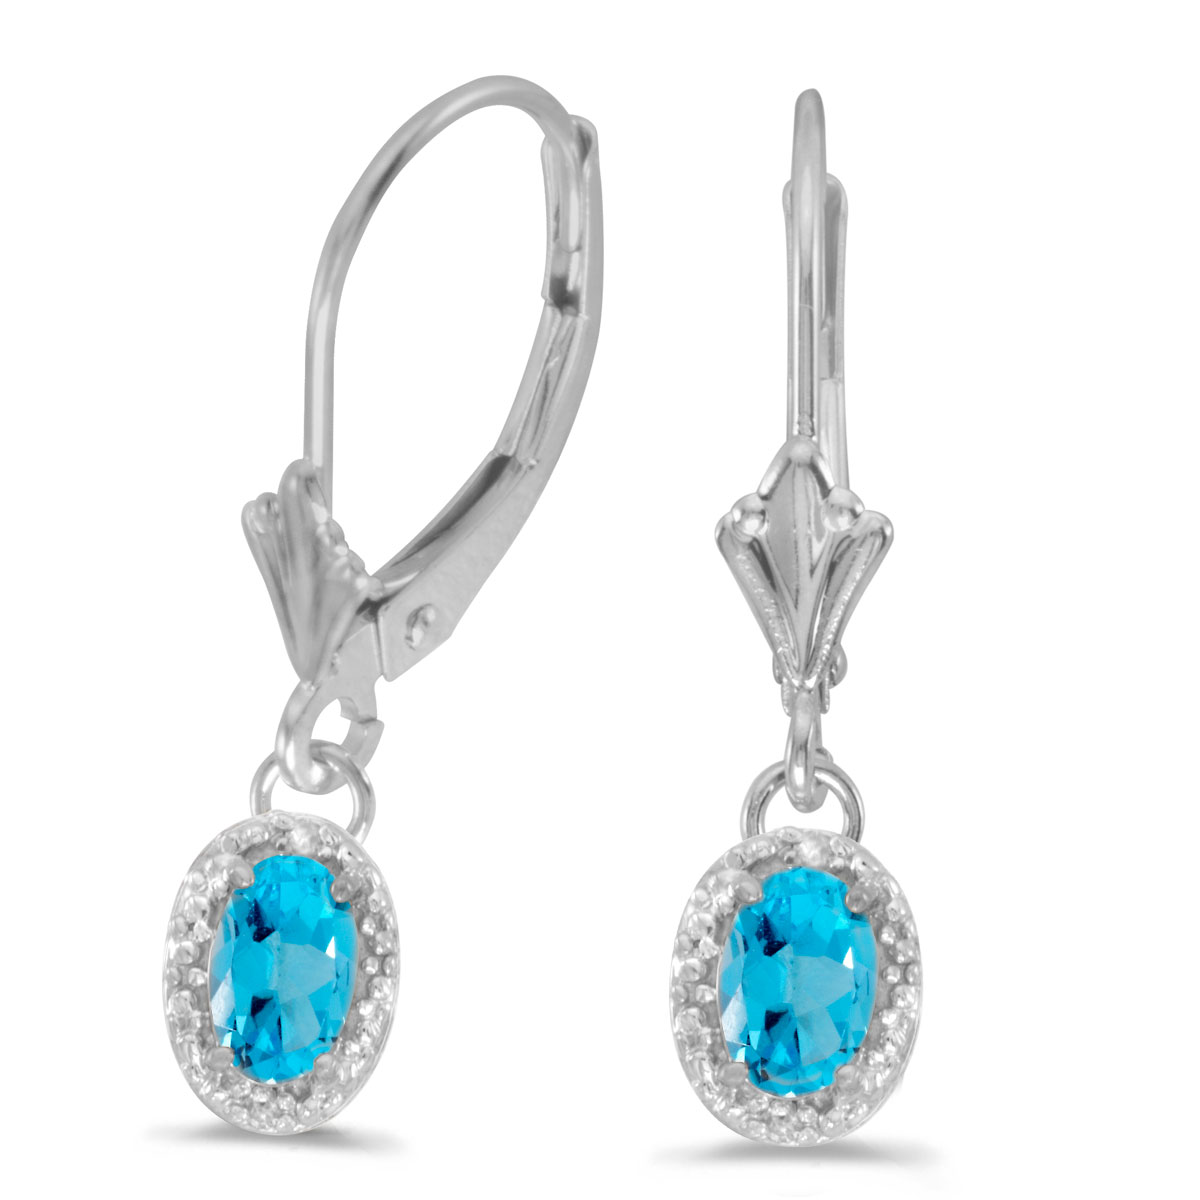 Beautiful 10k white gold leverback earrings with sophisticated 6x4 mm blue topaz stones complemen...